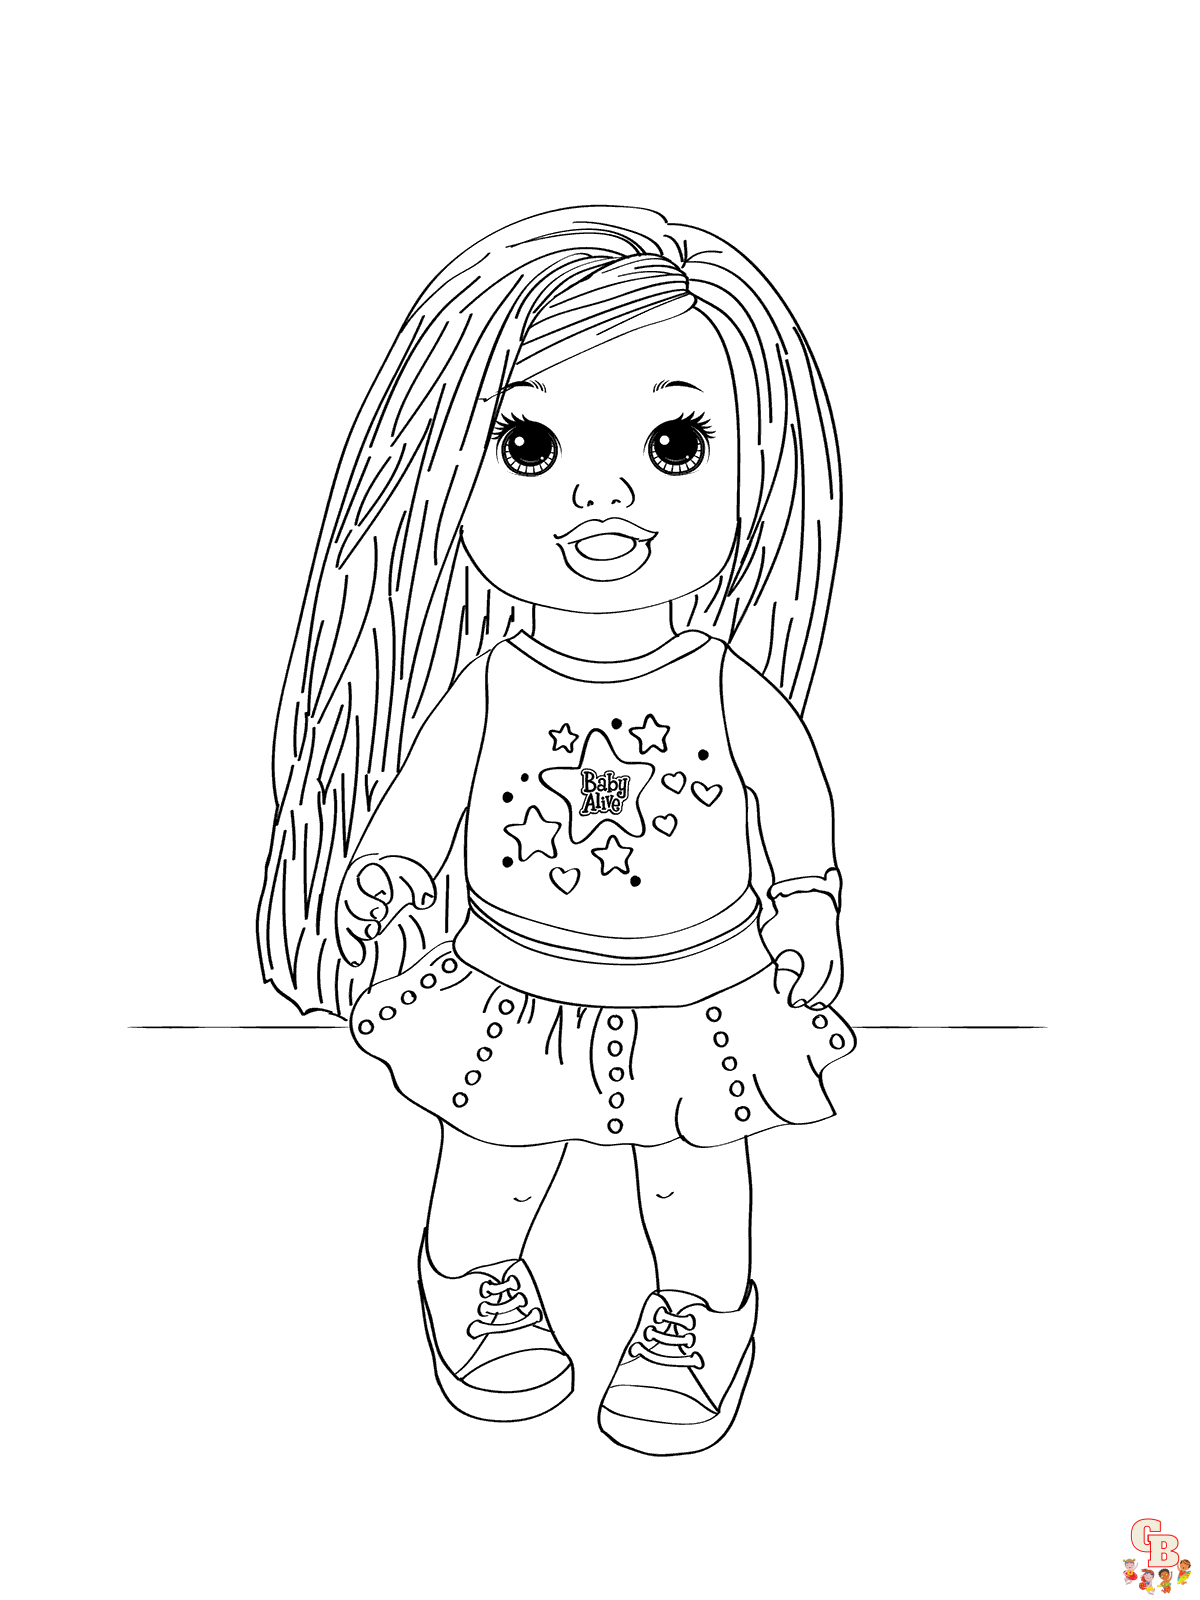 Cute Baby Alive Doll 塗り絵 3